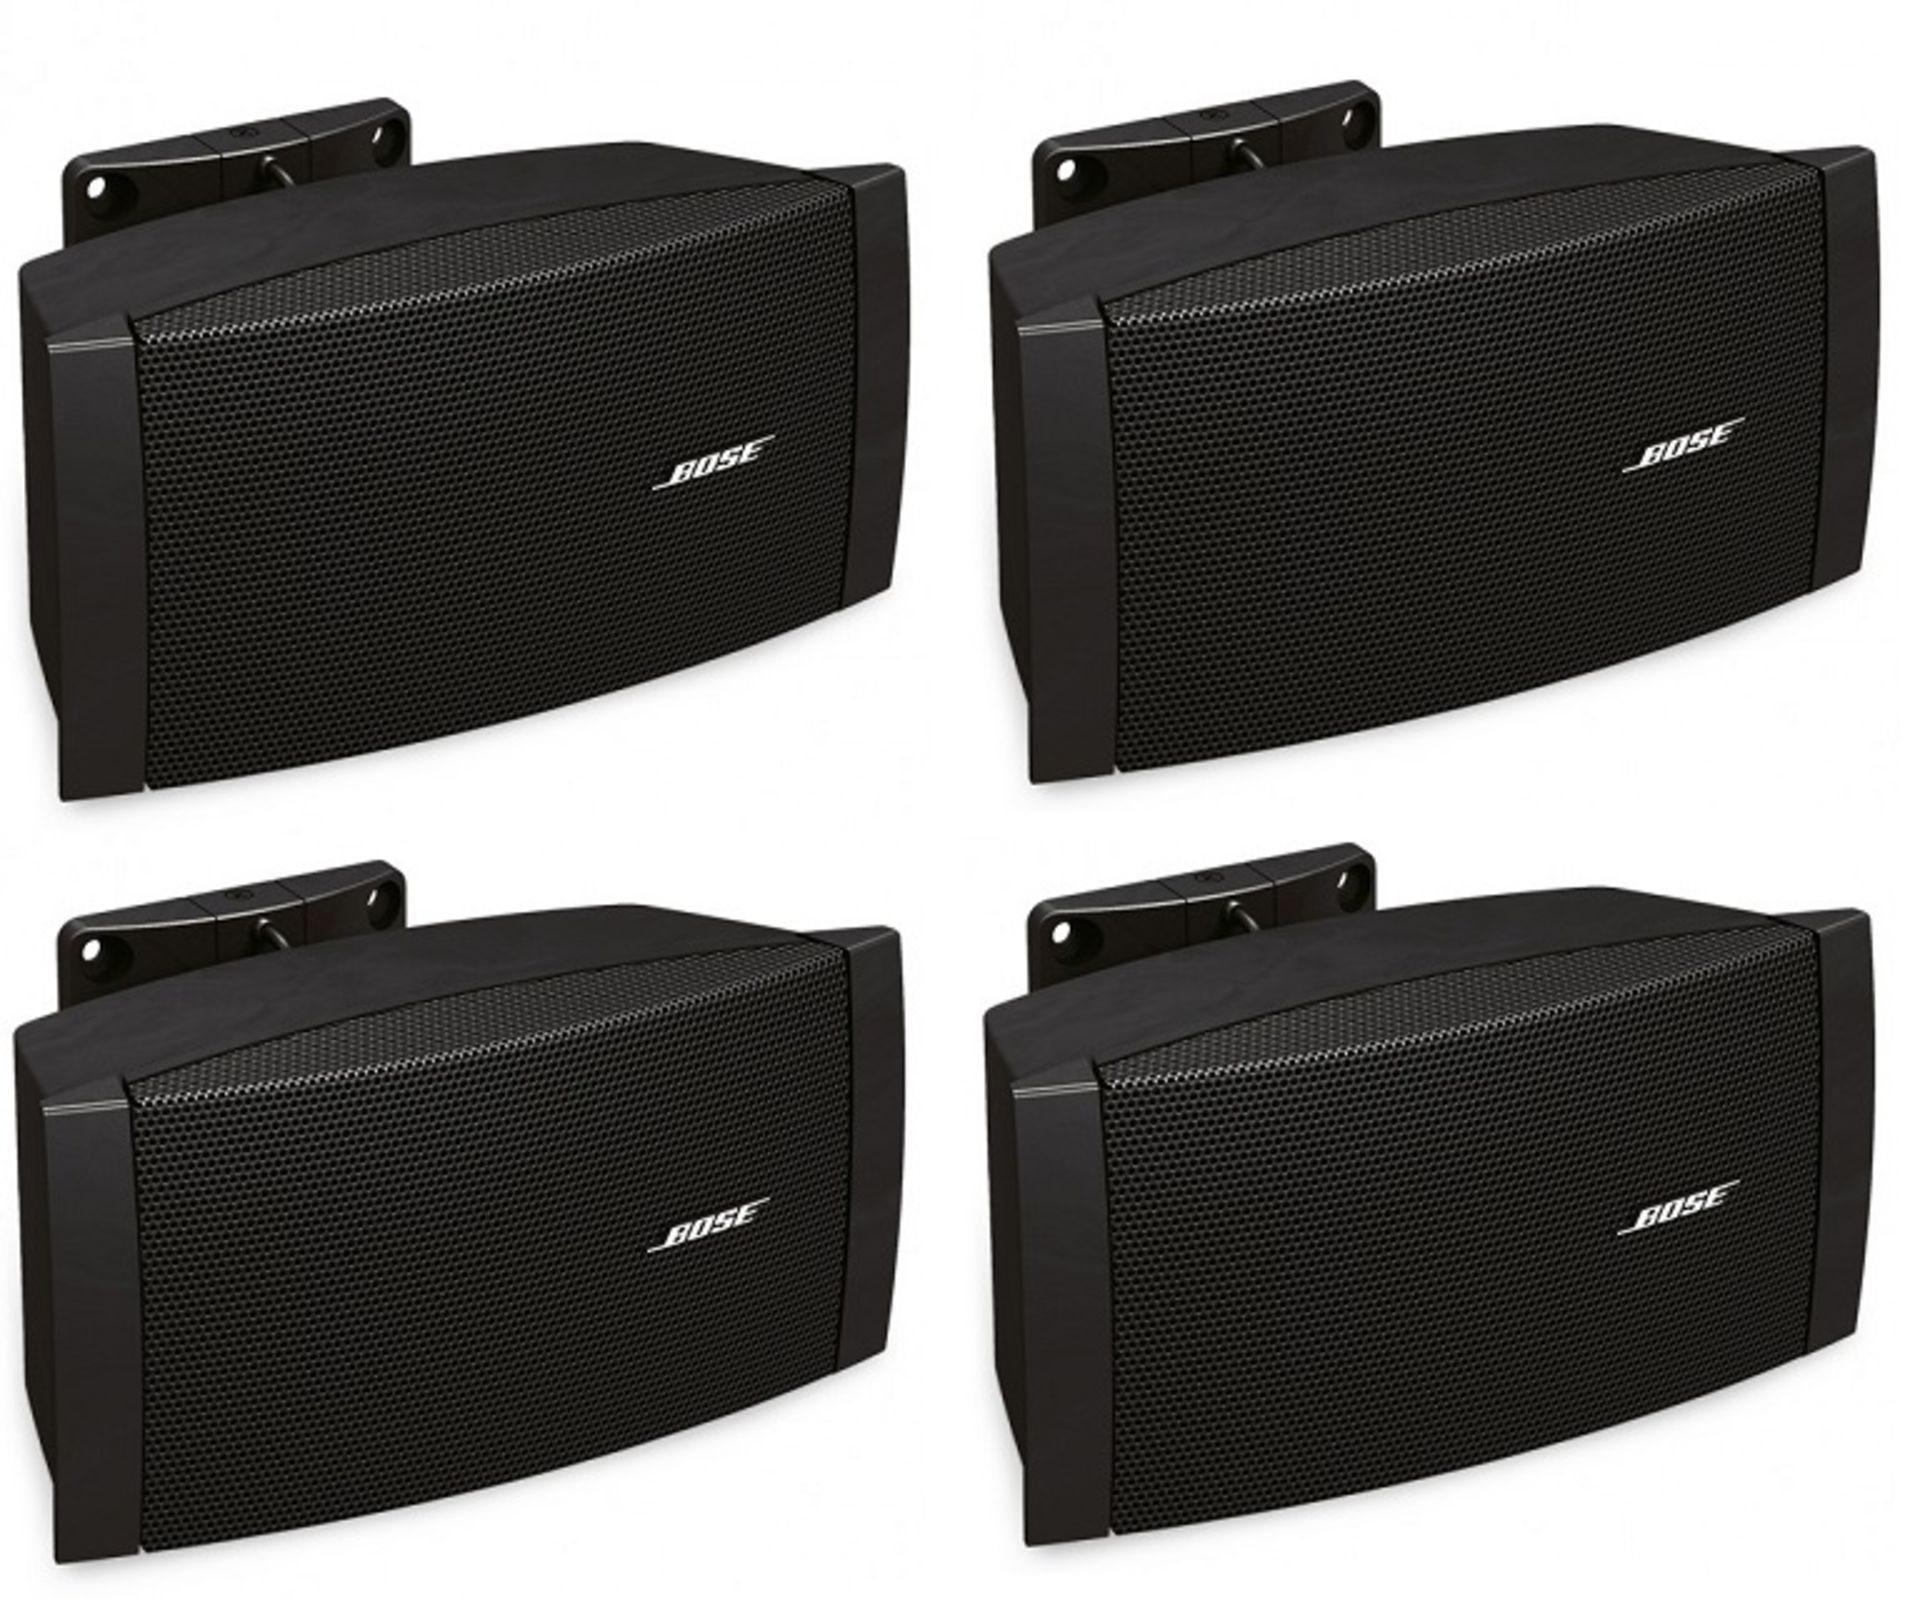 4 x Bose FreeSpace DS16S Indoor Surface-Mount Loudspeakers in Black - RRP £600 - CL584 - Location: